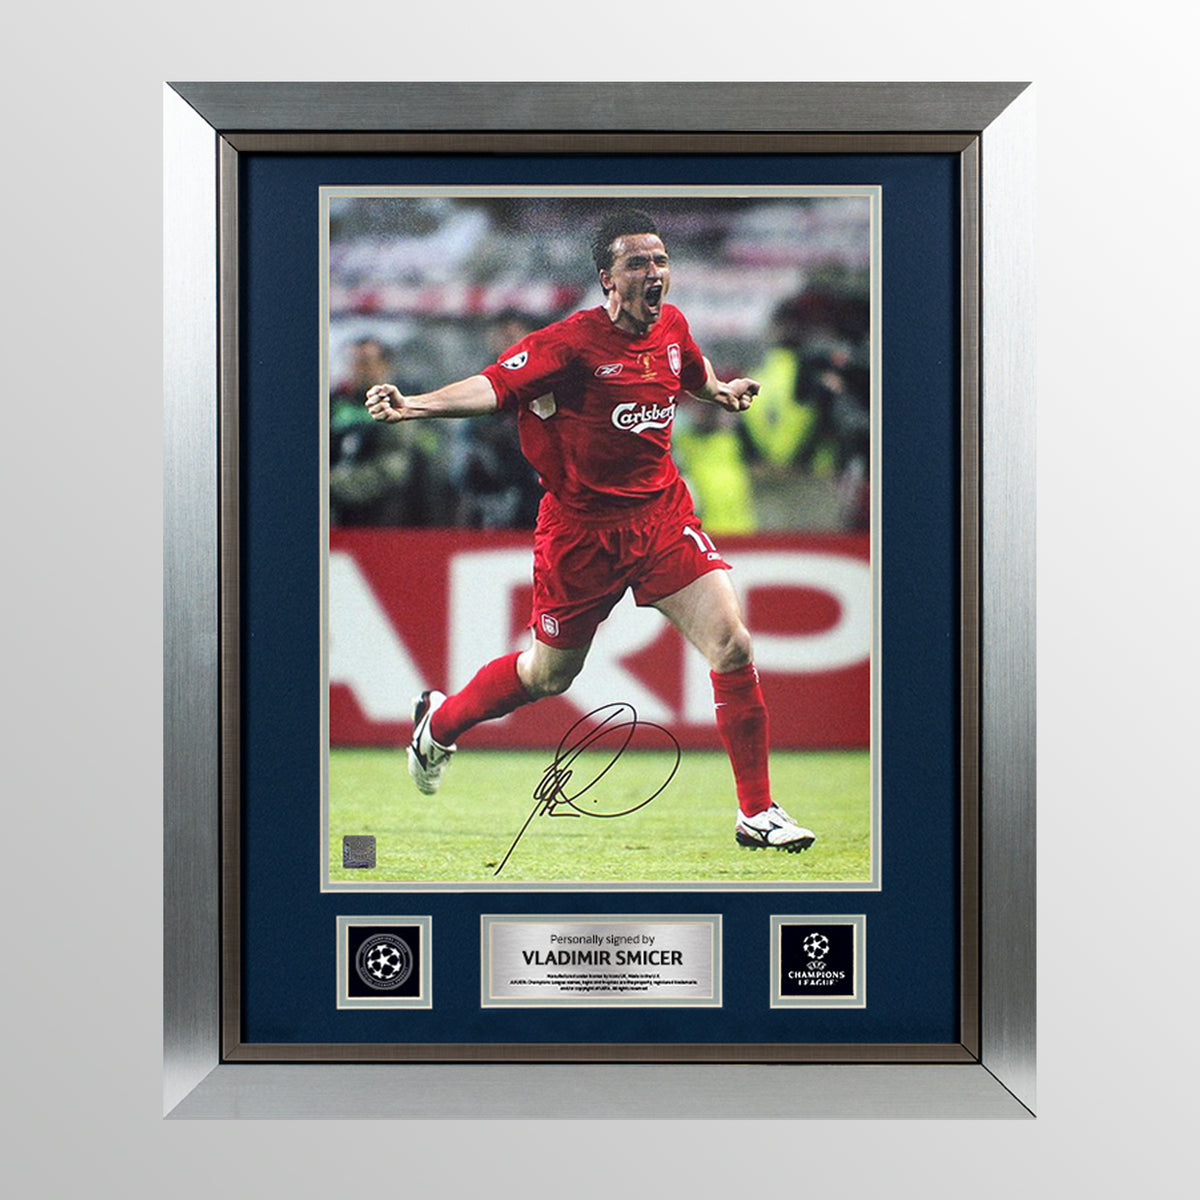 Vladimir Smicer Official UEFA Champions League Signed and Framed Liverpool Photo: 2005 Winner UEFA Club Competitions Online Store